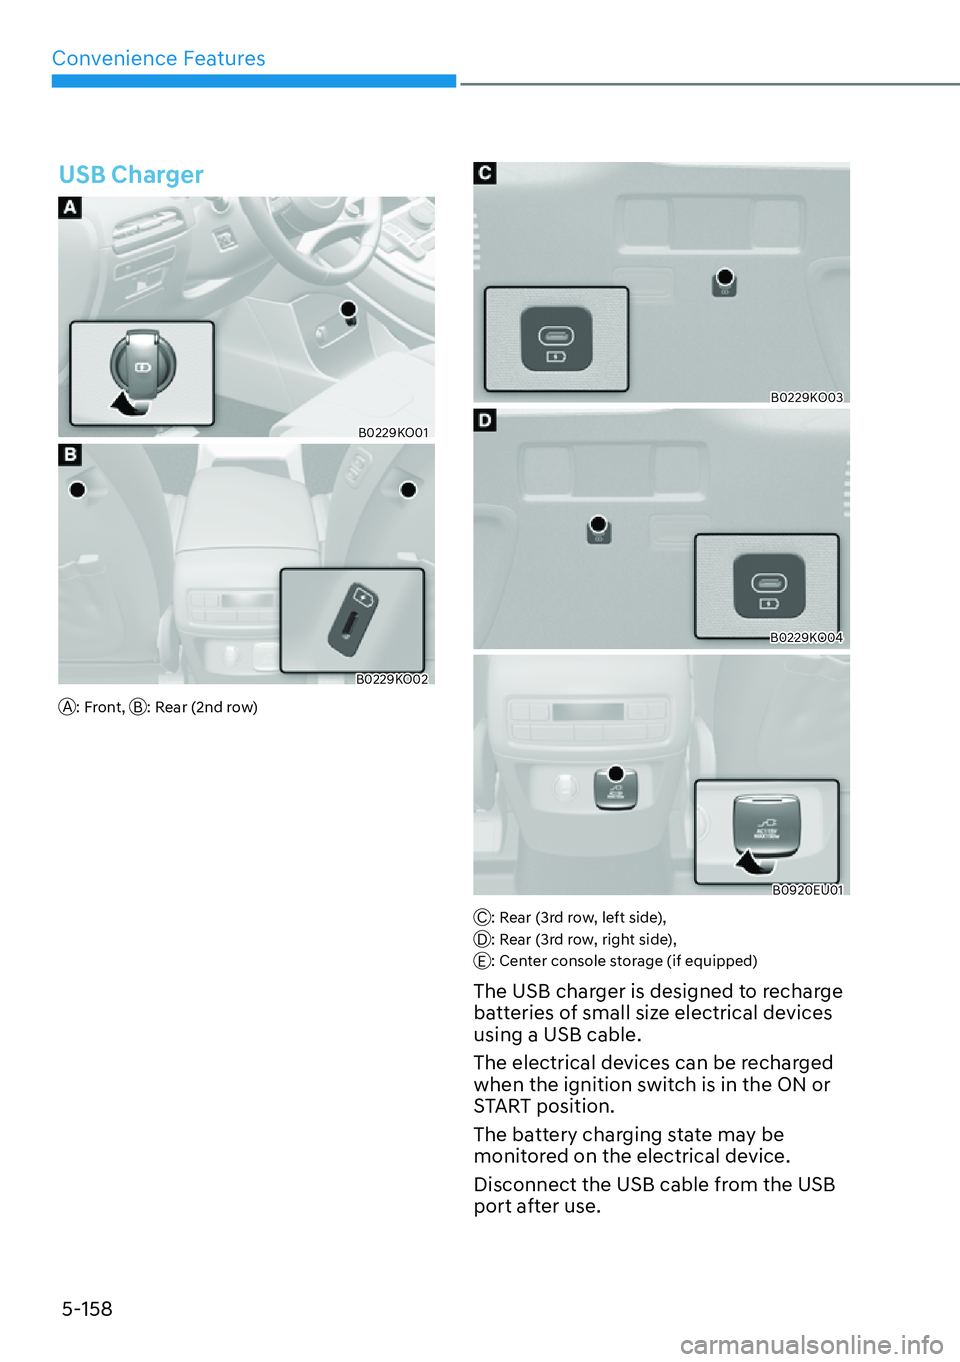 HYUNDAI PALISADE 2023  Owners Manual Convenience Features5-158
USB Charger
B0229KO01
B0229KO02
A: Front,  B: Rear (2nd row)
B0229KO03
B0229KO04
B0920EU01
C: Rear (3rd row, left side), 
D: Rear (3rd row, right side), 
E: Center console st